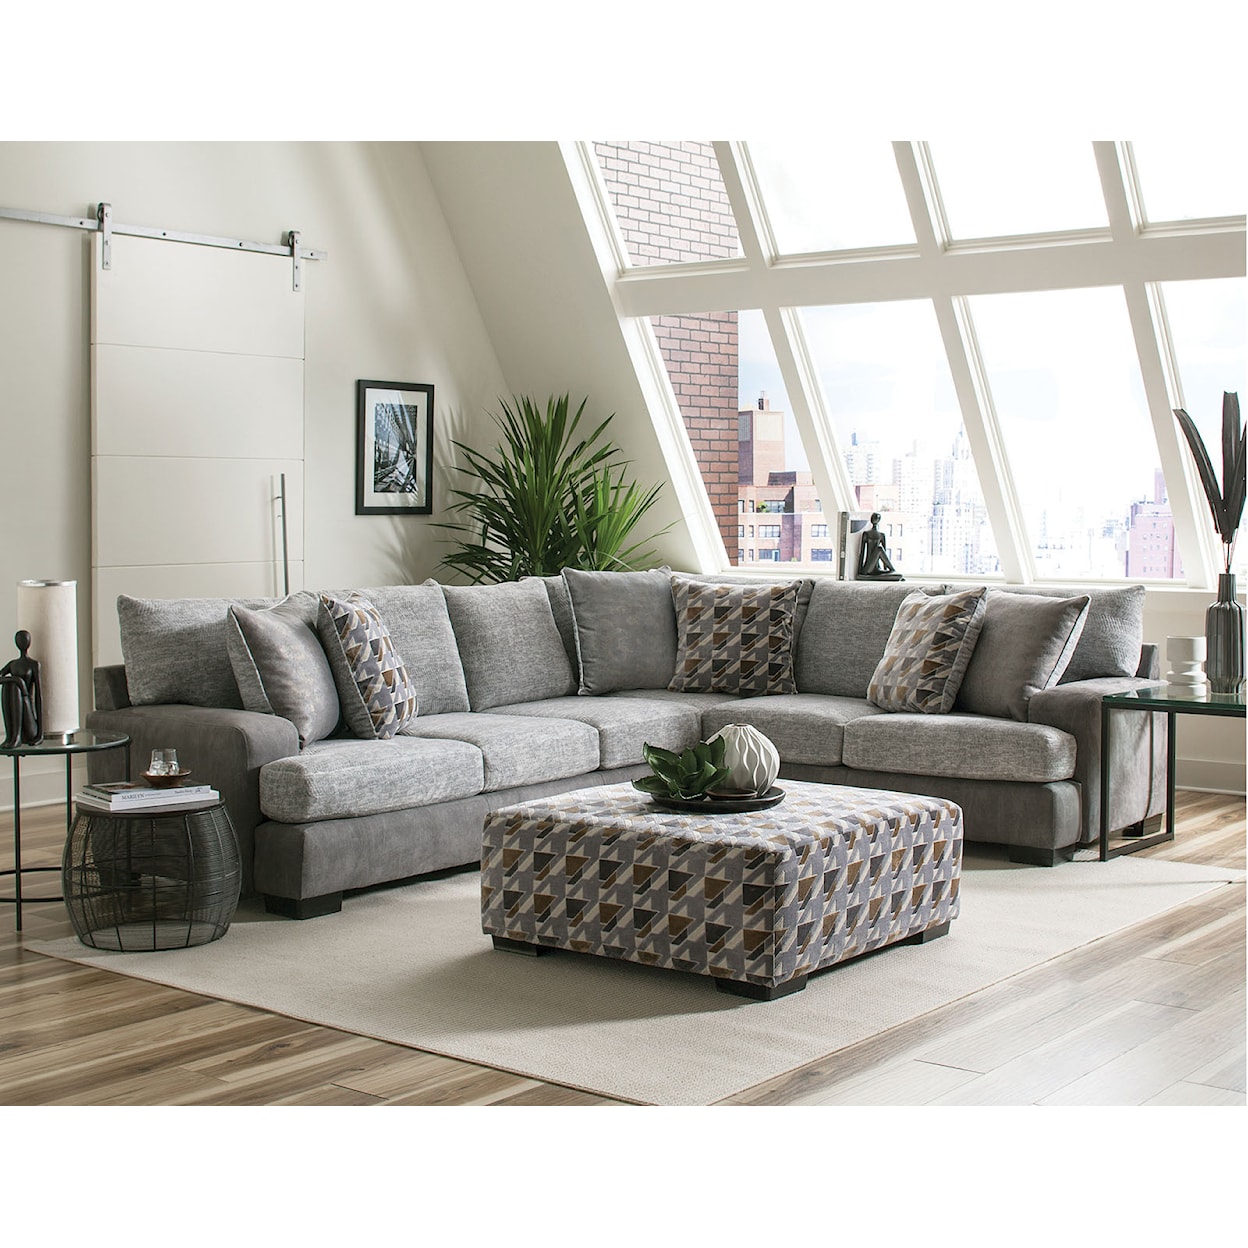 Furniture of America Alannah Sectional